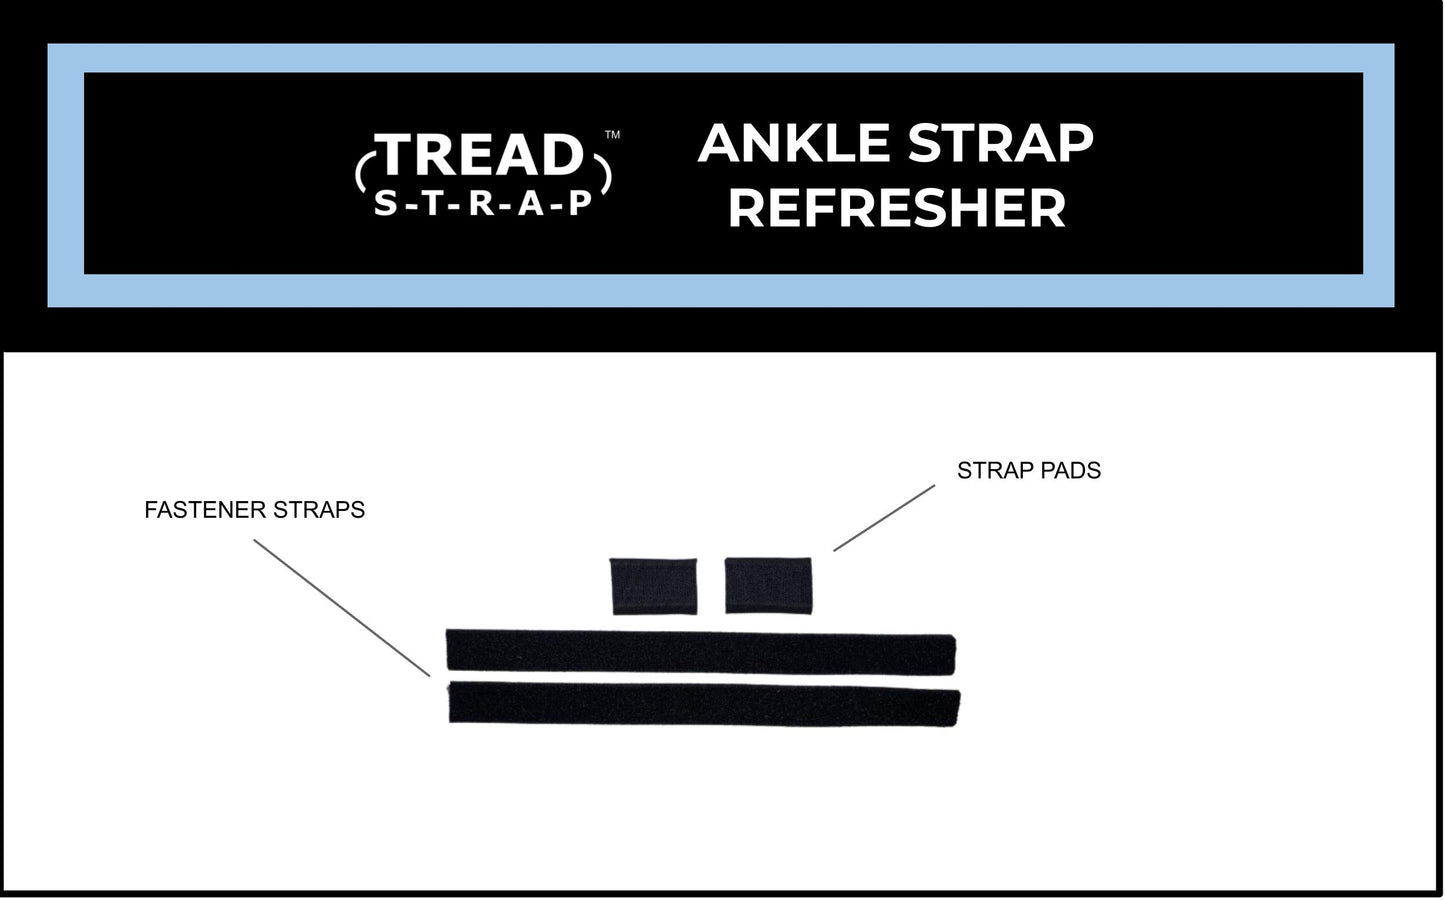 ANKLE STRAP REFRESHER - Foot Drop Ankle-Foot Orthosis (AFO)